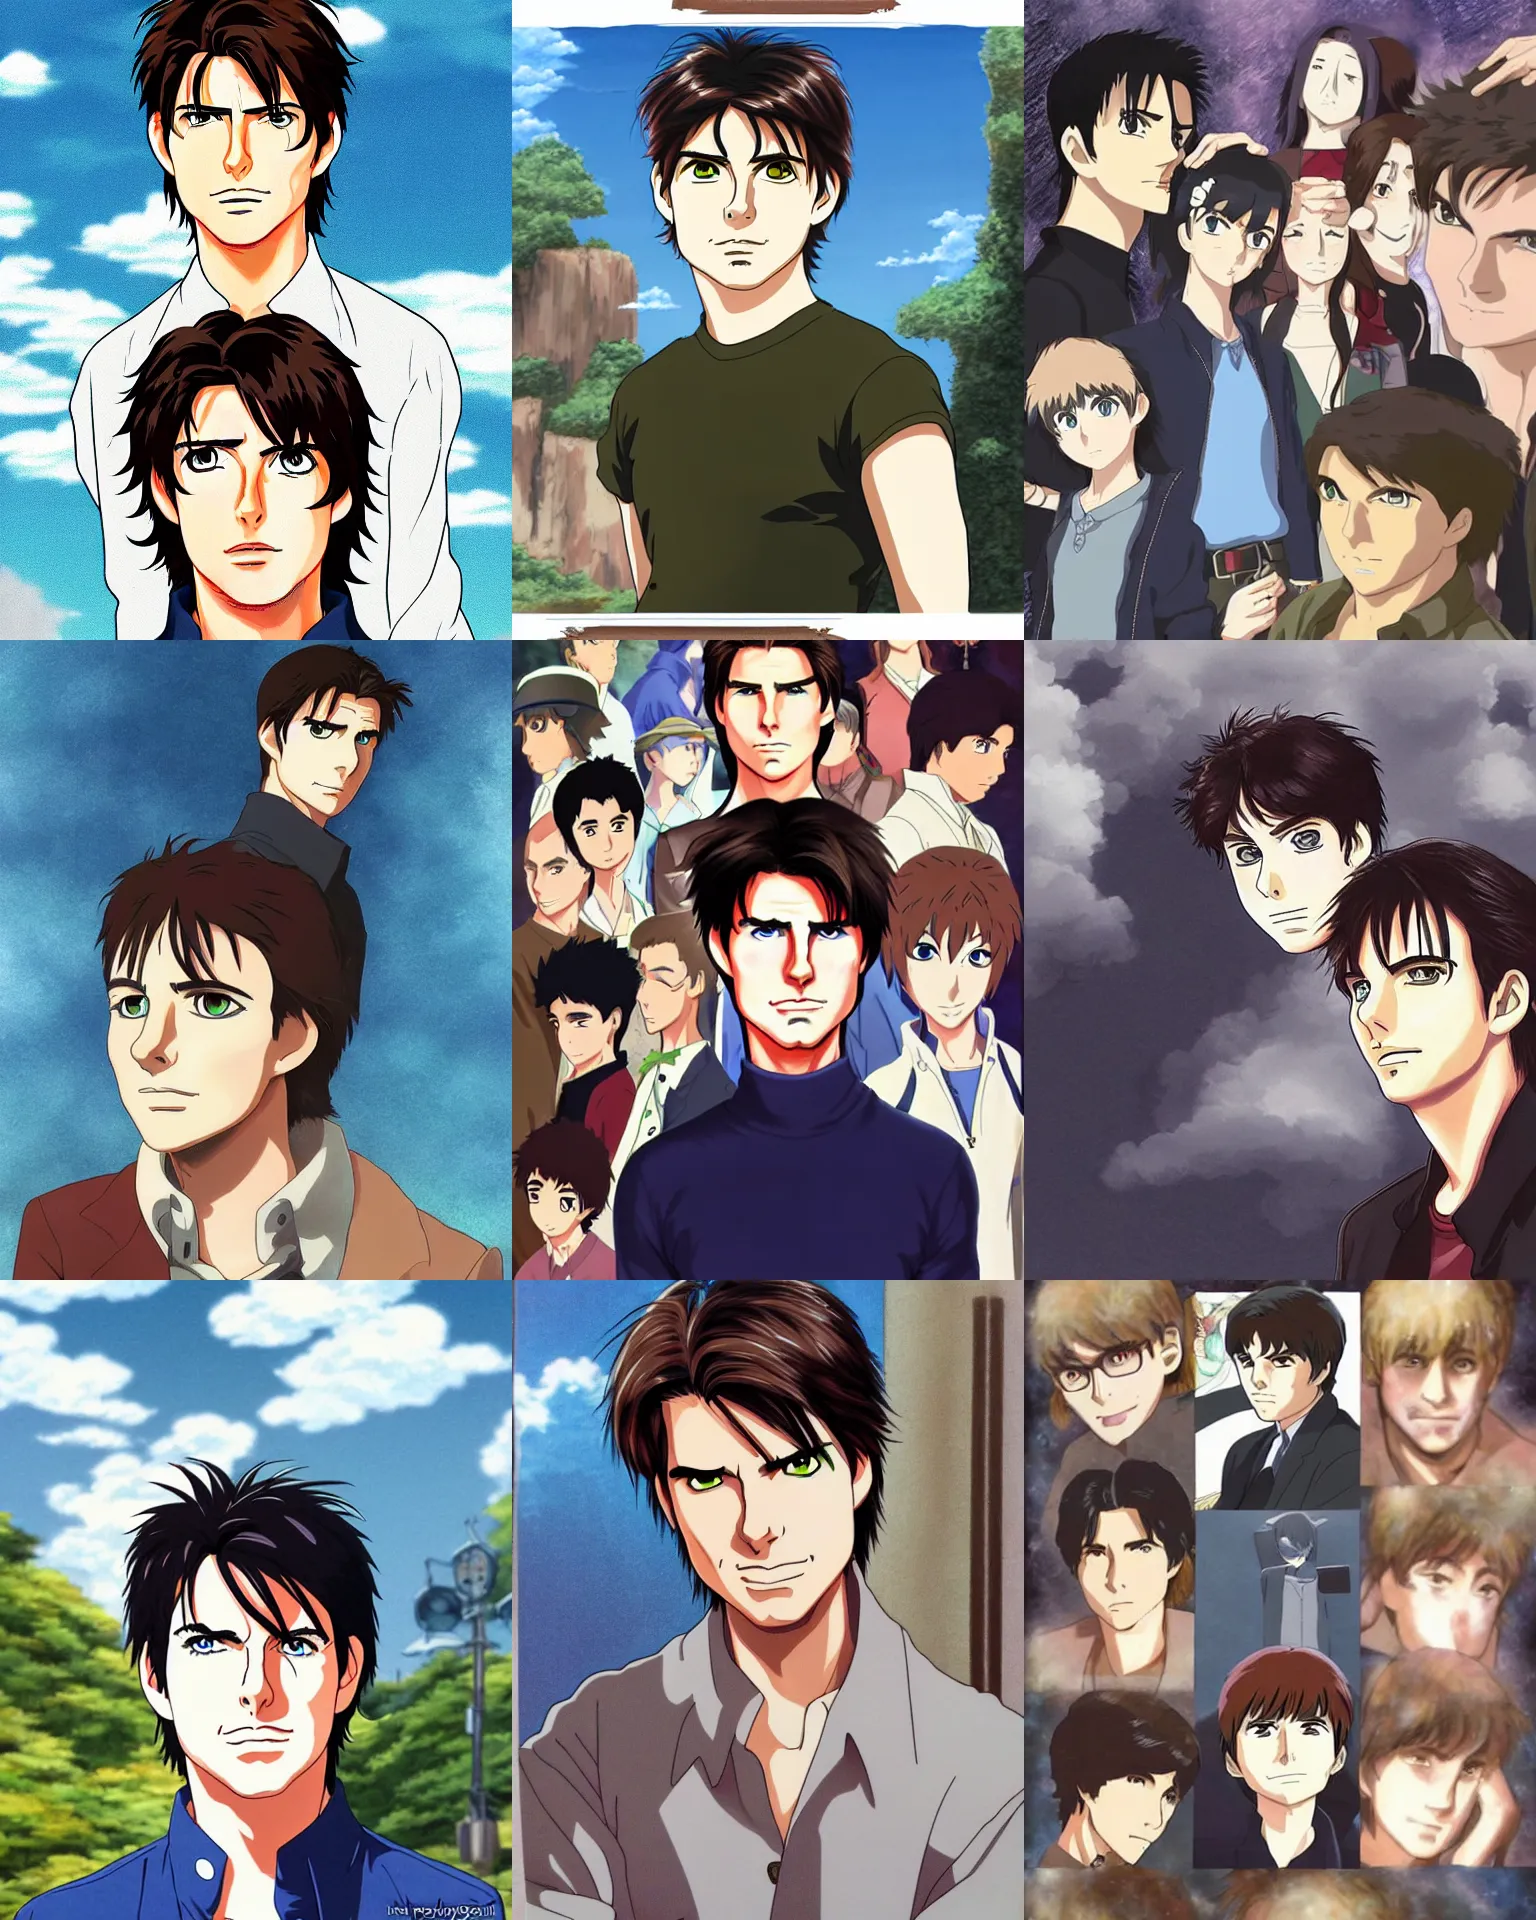 Prompt: Anime portrait of Tom Cruise in style of Ghibli studio